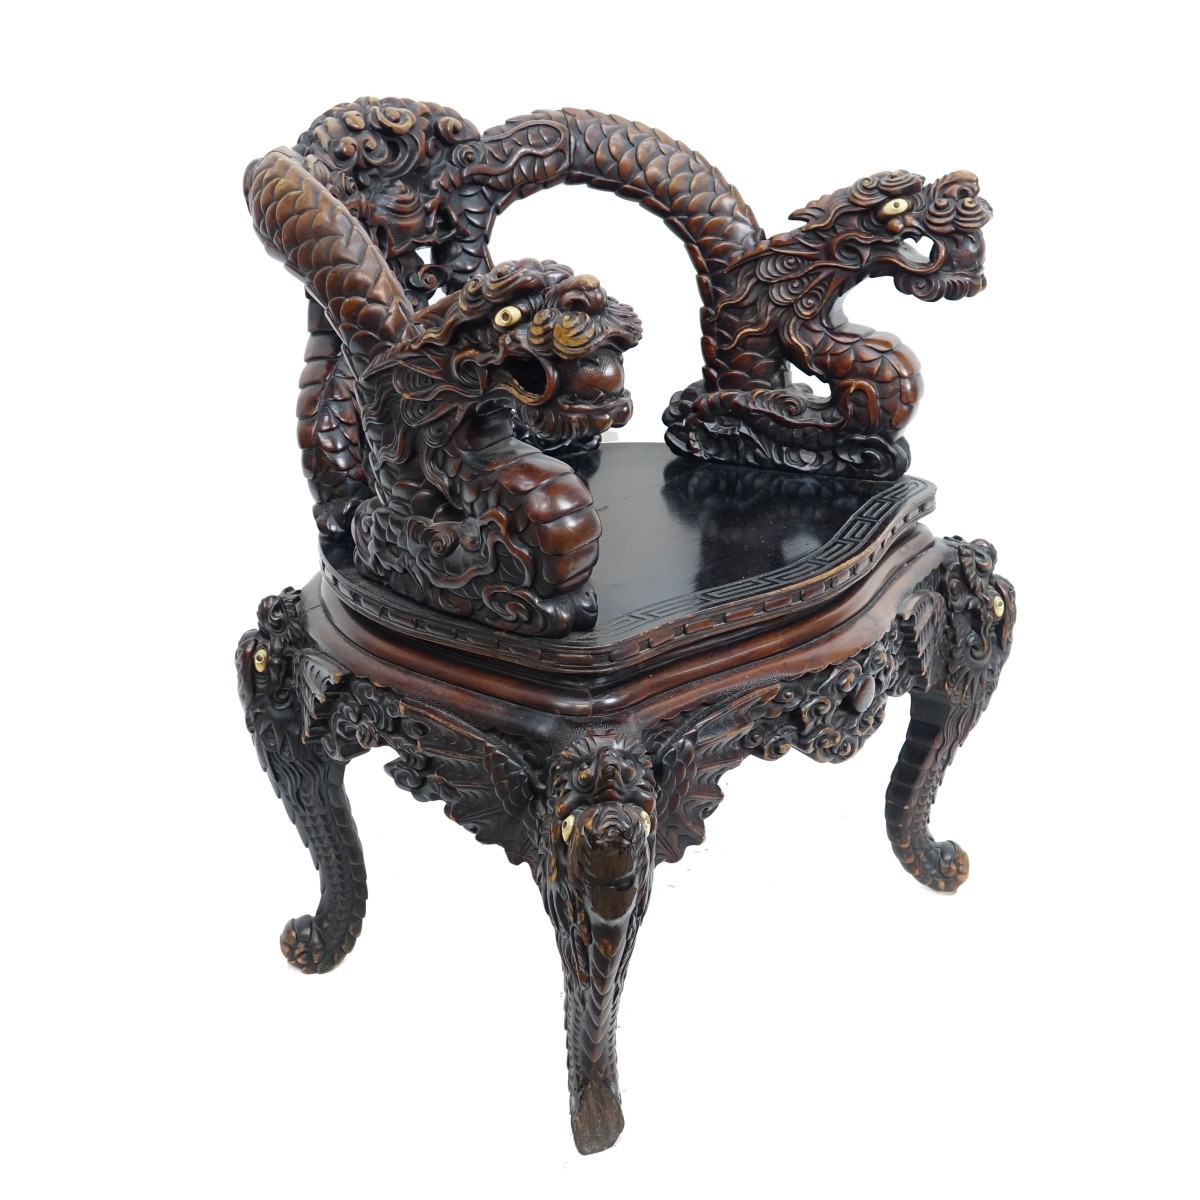 Antique Chinese Carved Hardwood Dragon Armchair